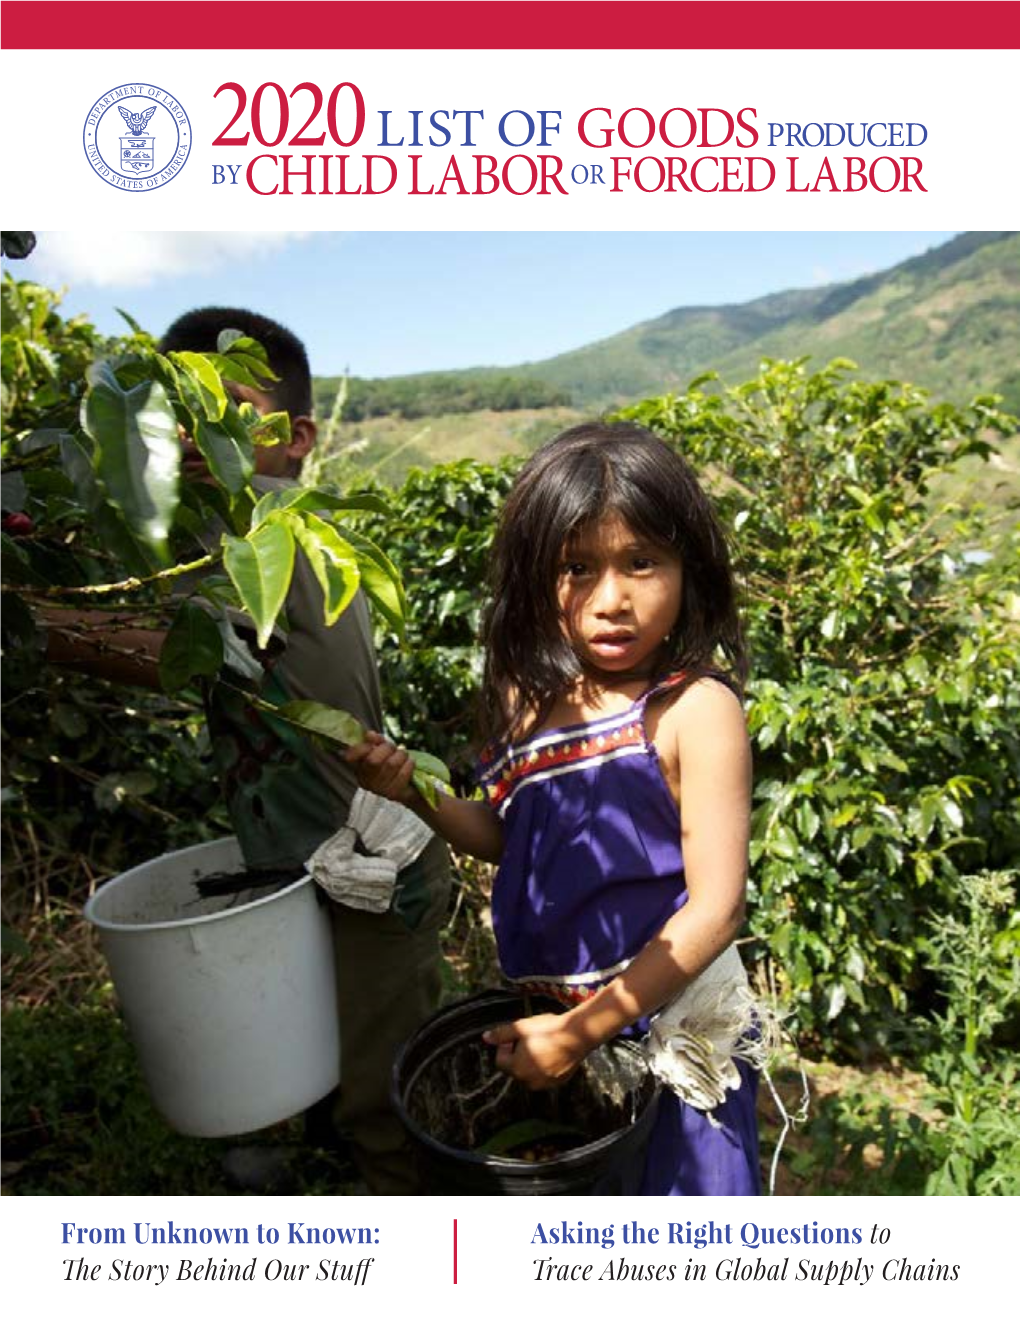 2020 List of Goods Produced by Child Labor Or Forced Labor